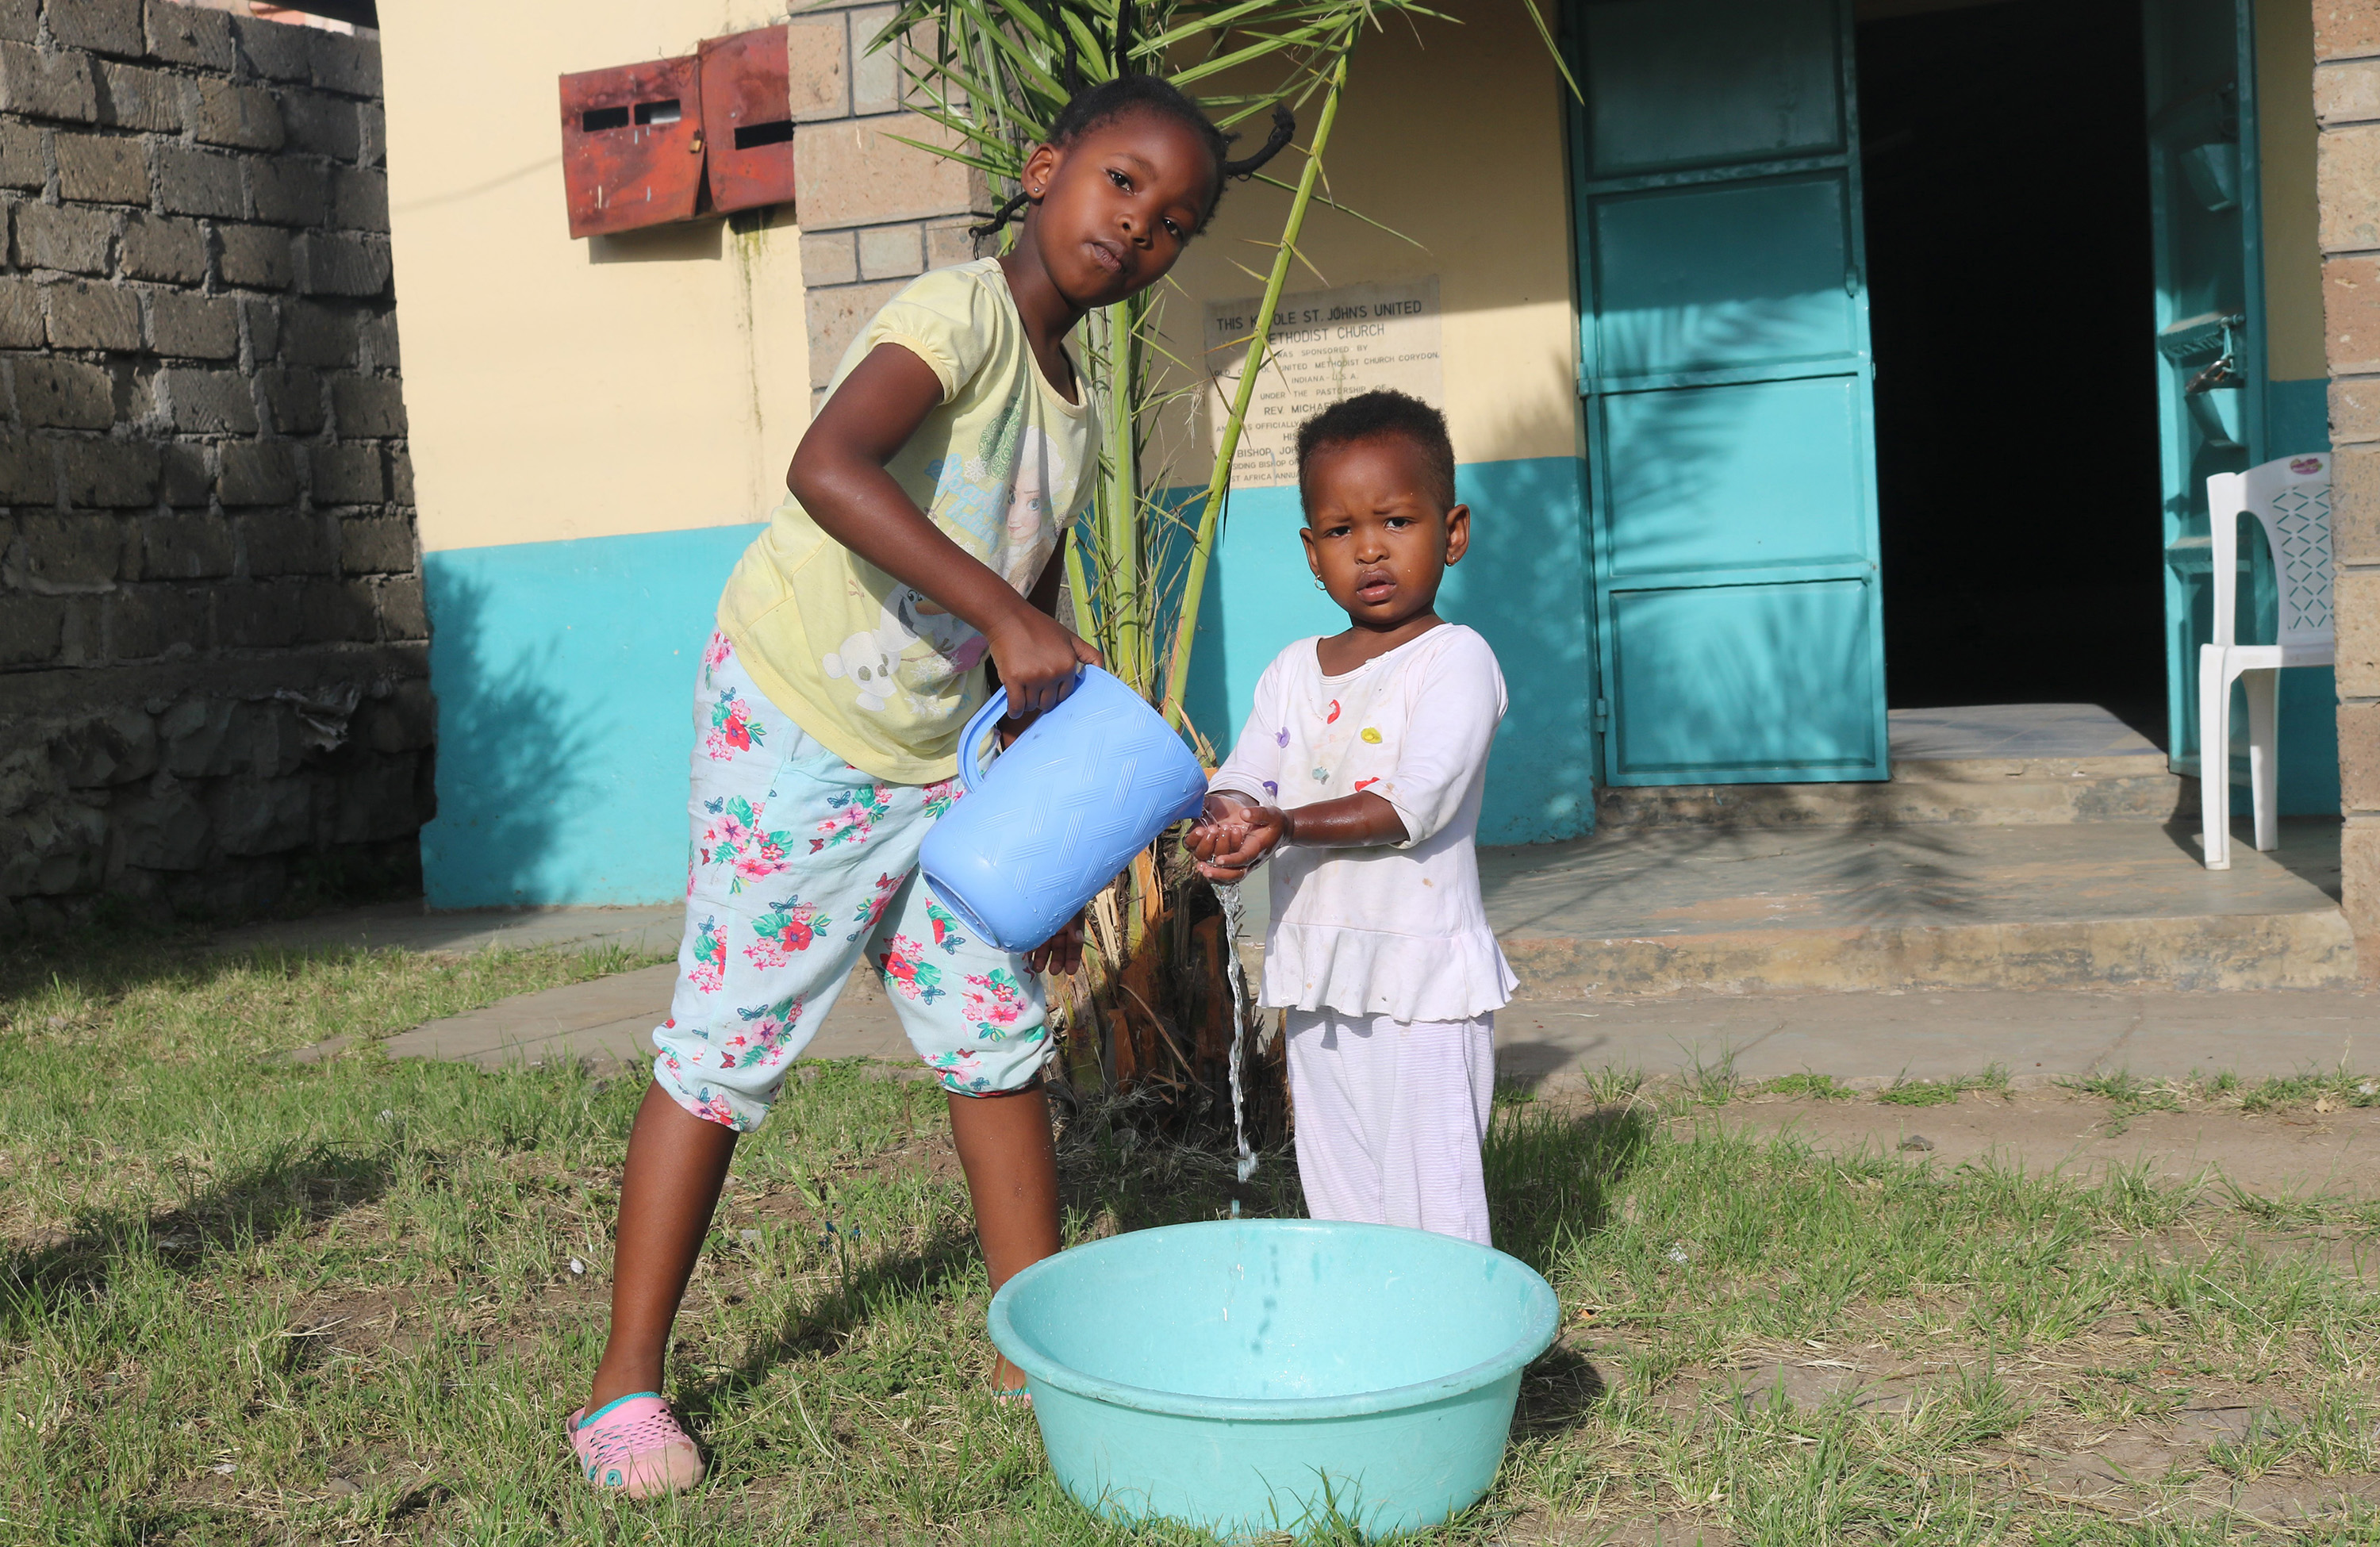 Nine-year-old Shantel Resse washes the hands of her younger sister, Reina Muthoni, at Kayole St. John’s United Methodist Church in Nairobi, Kenya. Churches in Kenya are urging members to wash their hands using soap or hand sanitizer to stop the spread of the coronavirus. Photo by Gad Maiga, UM News.  